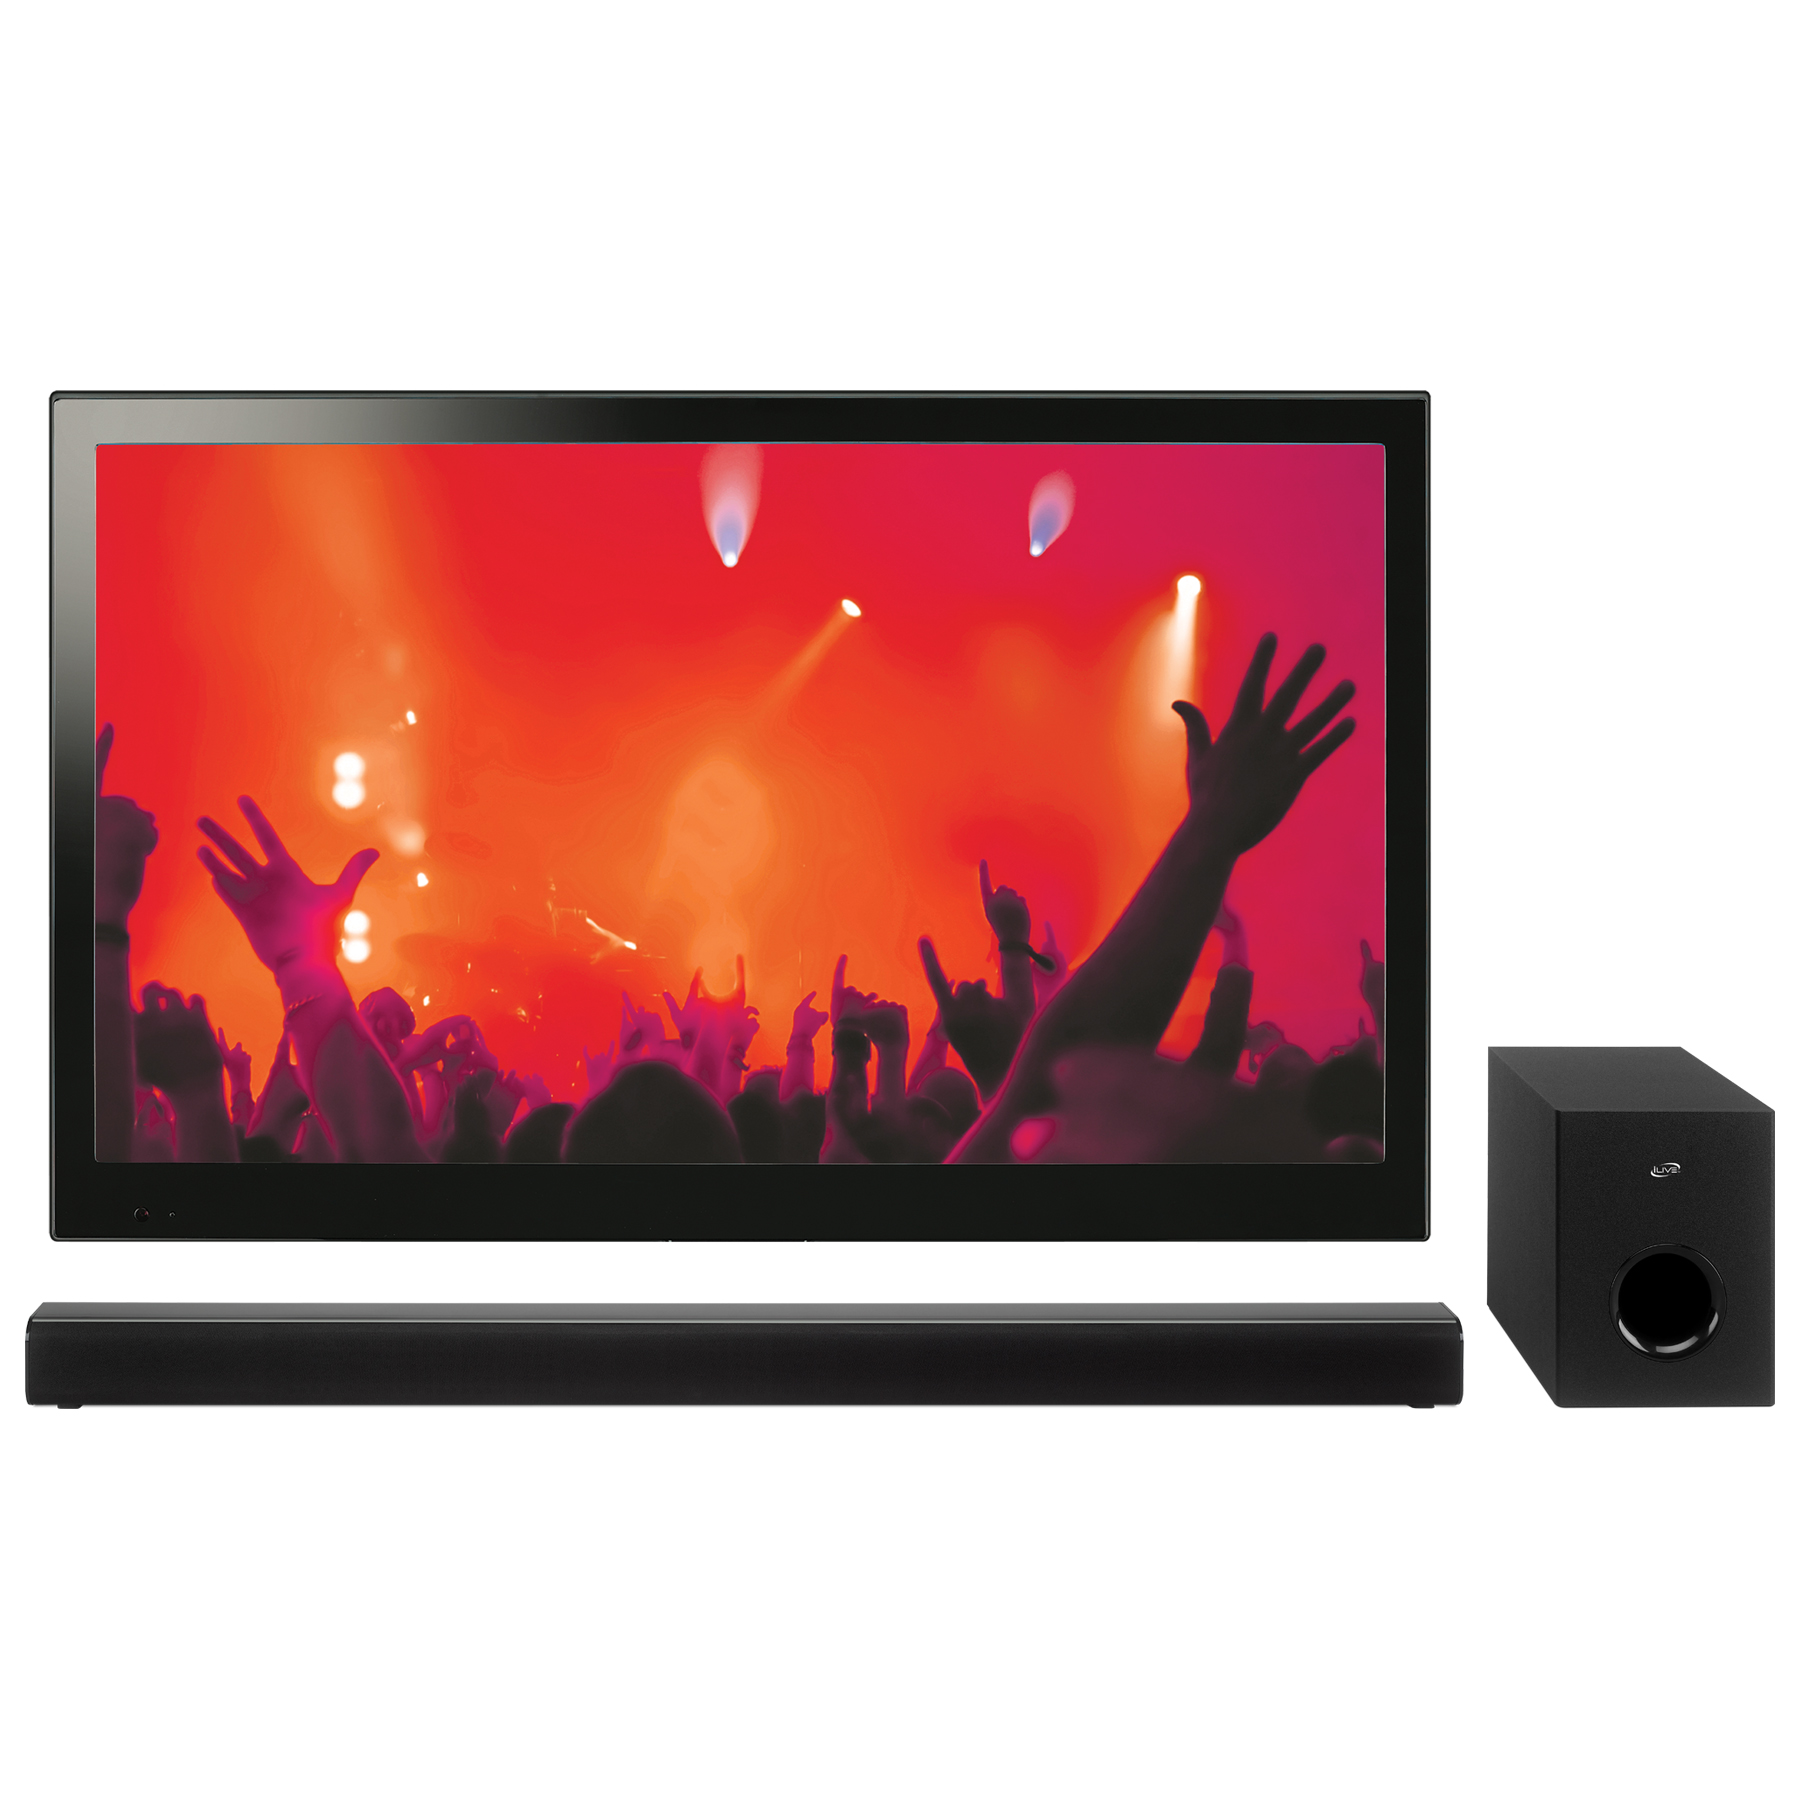 iLive 2.1 37" HD Soundbar and Wireless Subwoofer, ITBSW399B - image 4 of 6